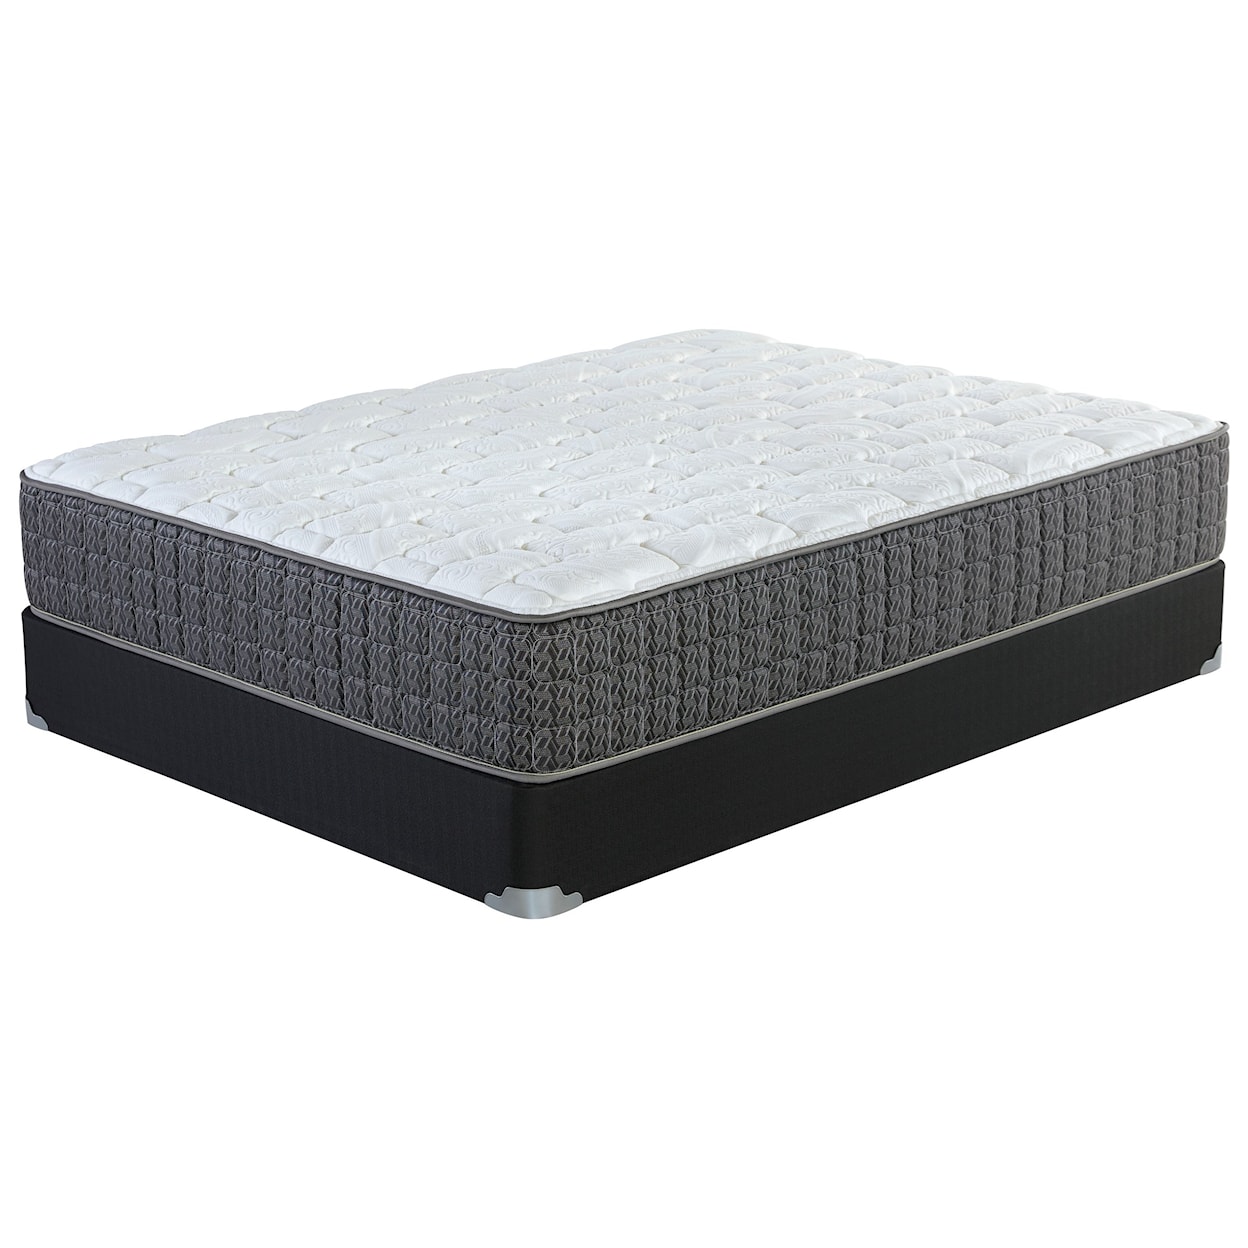 Corsicana Kinley Firm Full Firm Pocketed Coil Mattress Set